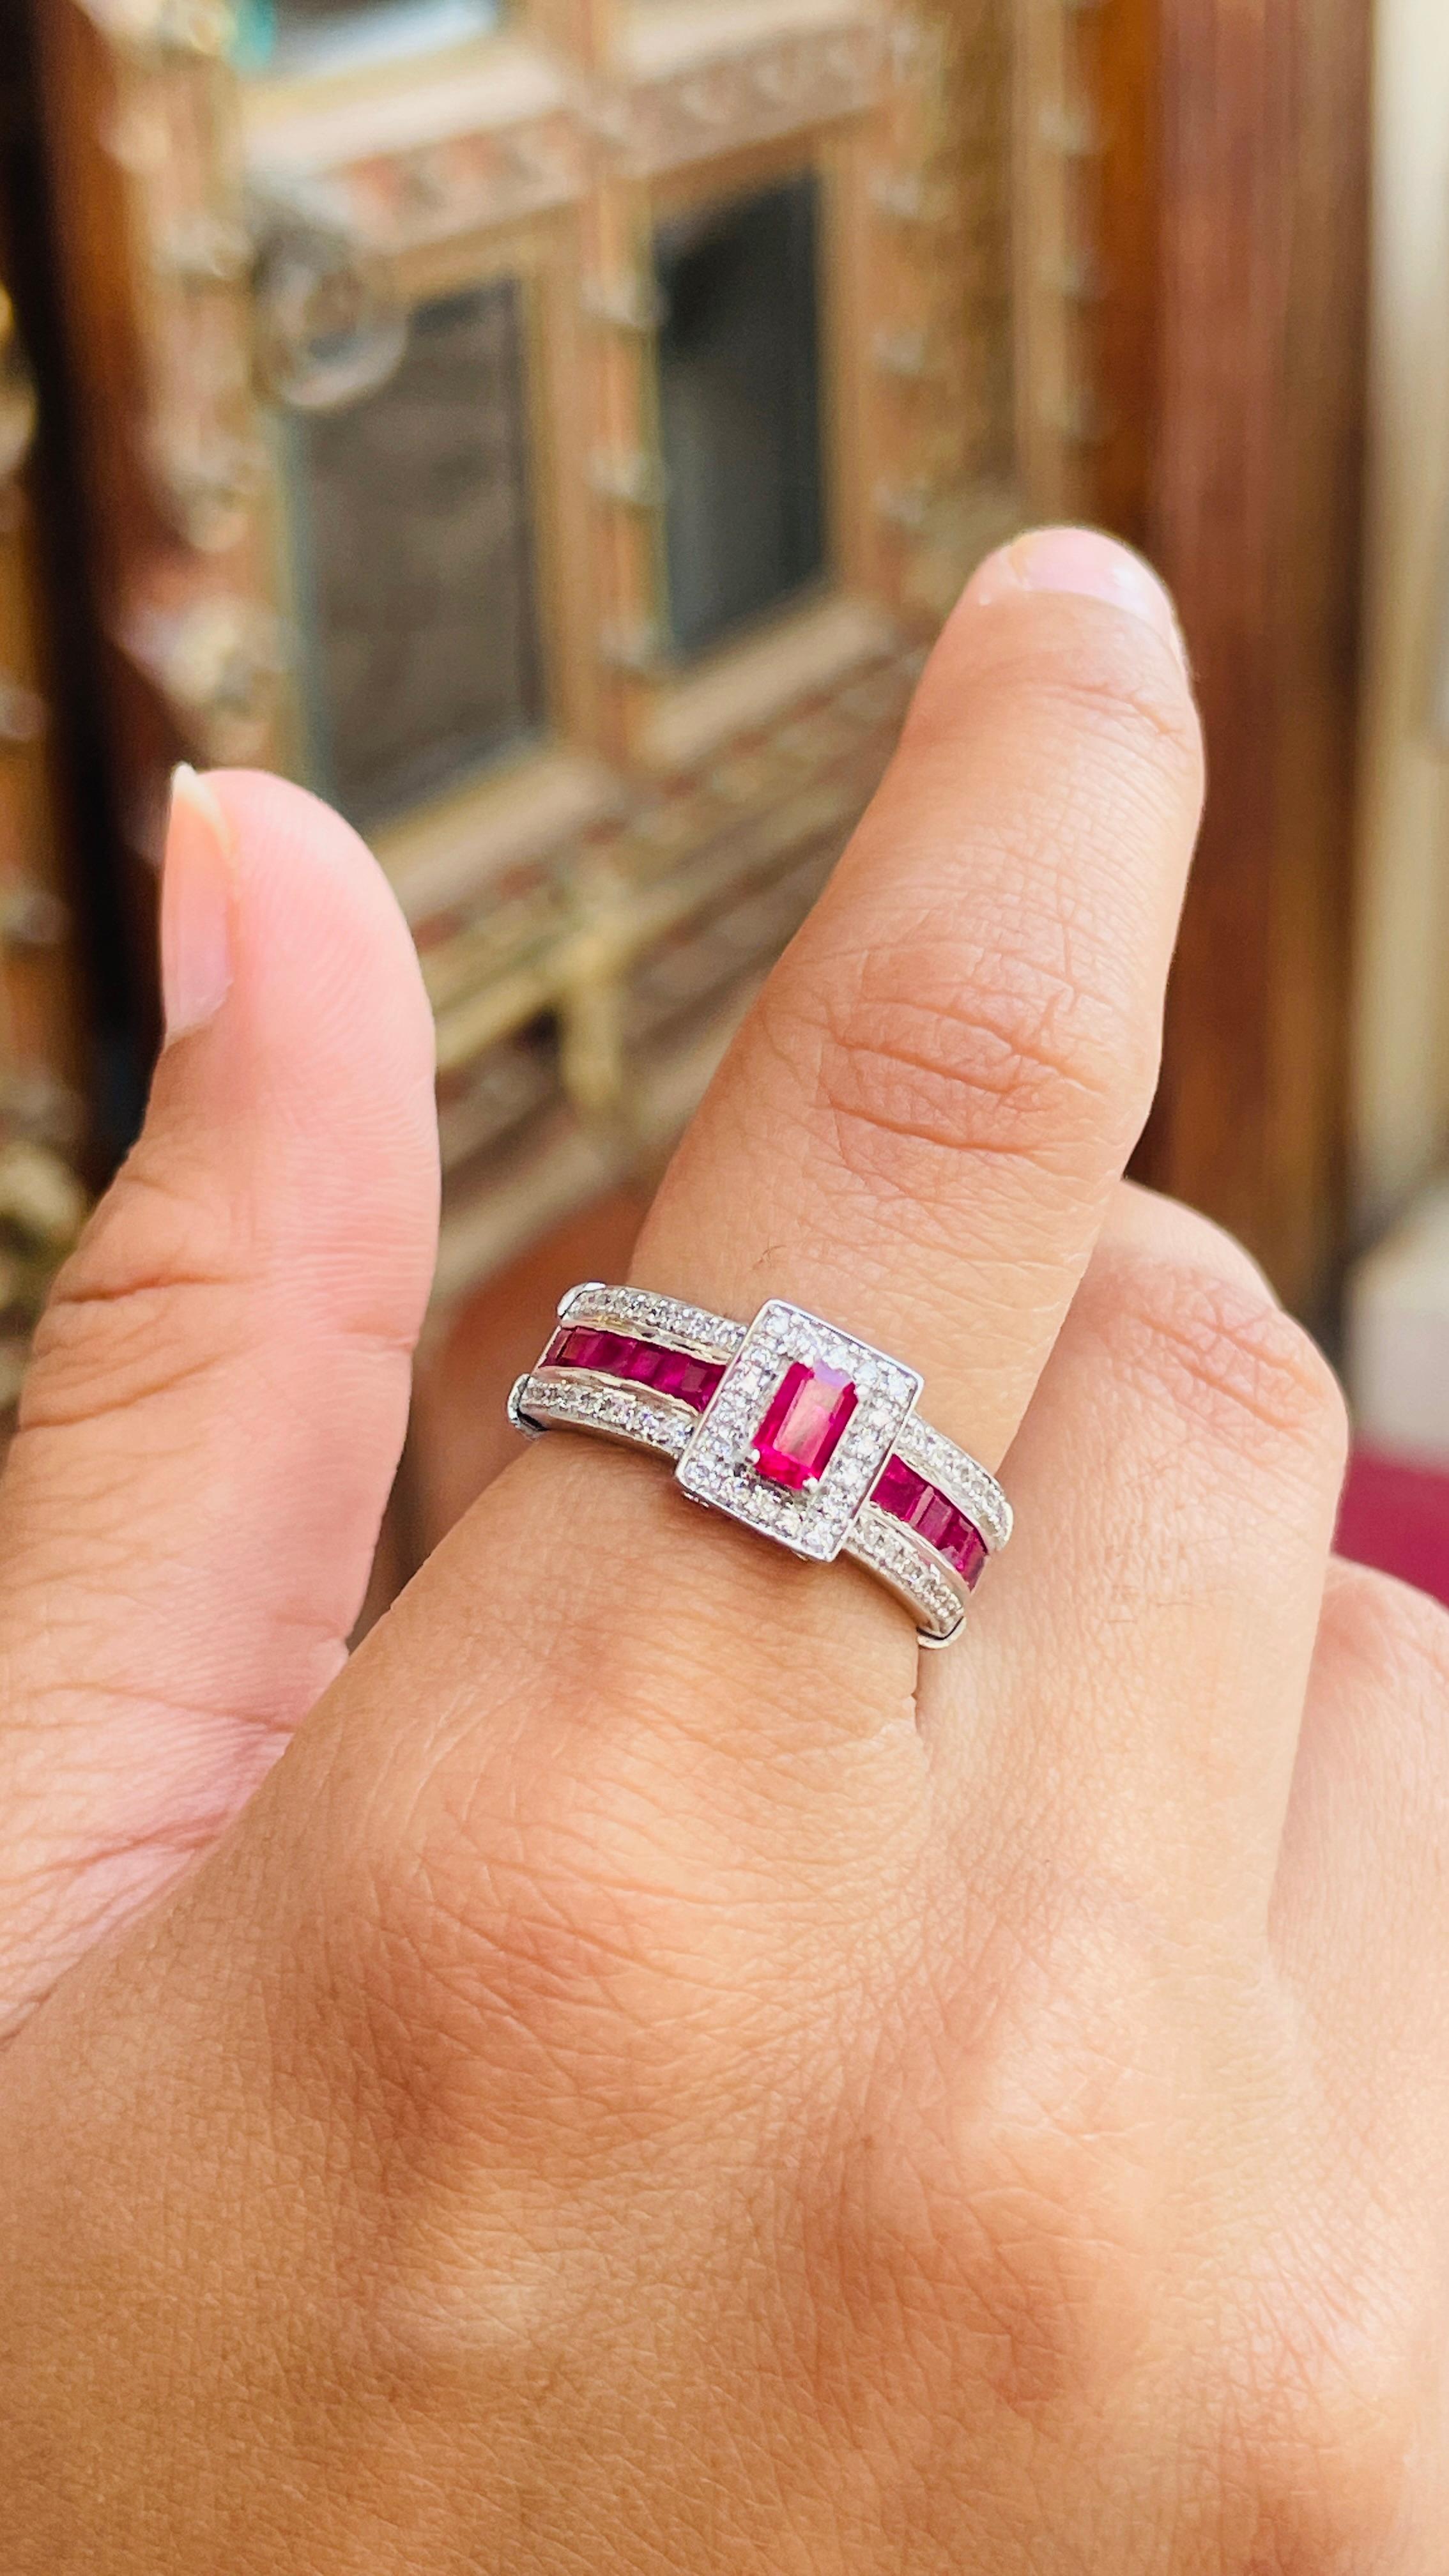 For Sale:  Prong Set Ruby Cluster Ring in 14K White Gold with Diamonds    7